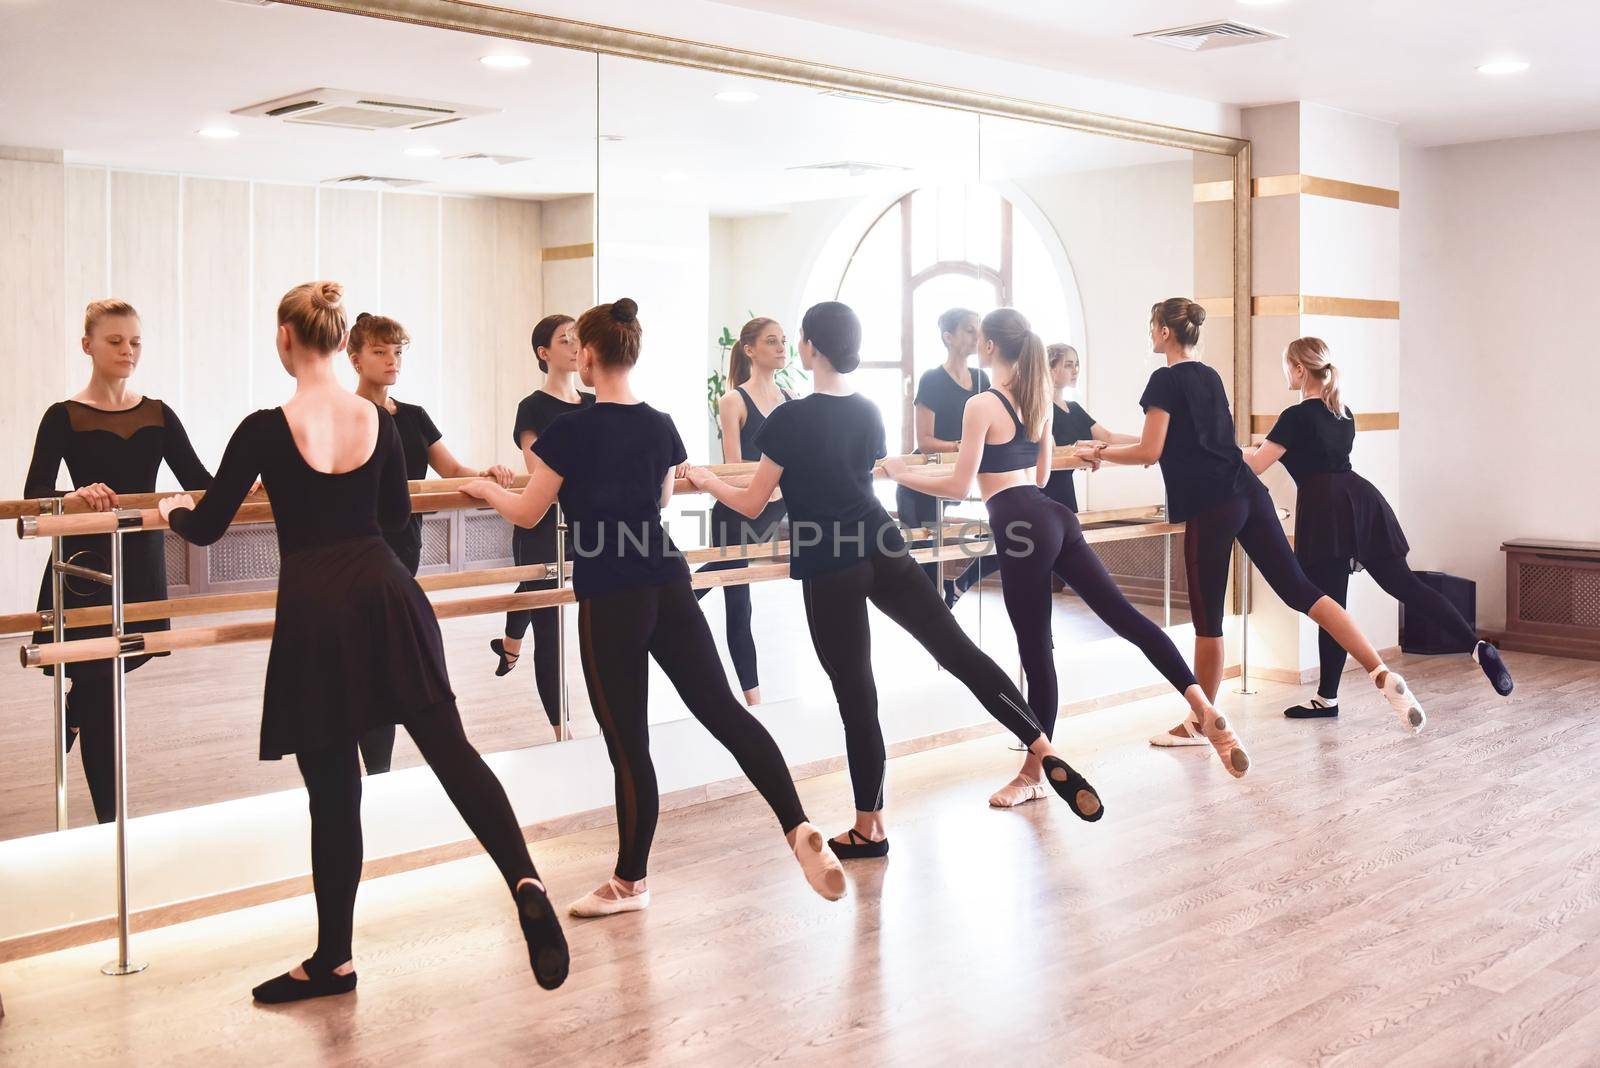 Group of people doing exercises using barre in gym with focus to fit athletic toned .woman in foreground in health and fitness concept. by Nickstock